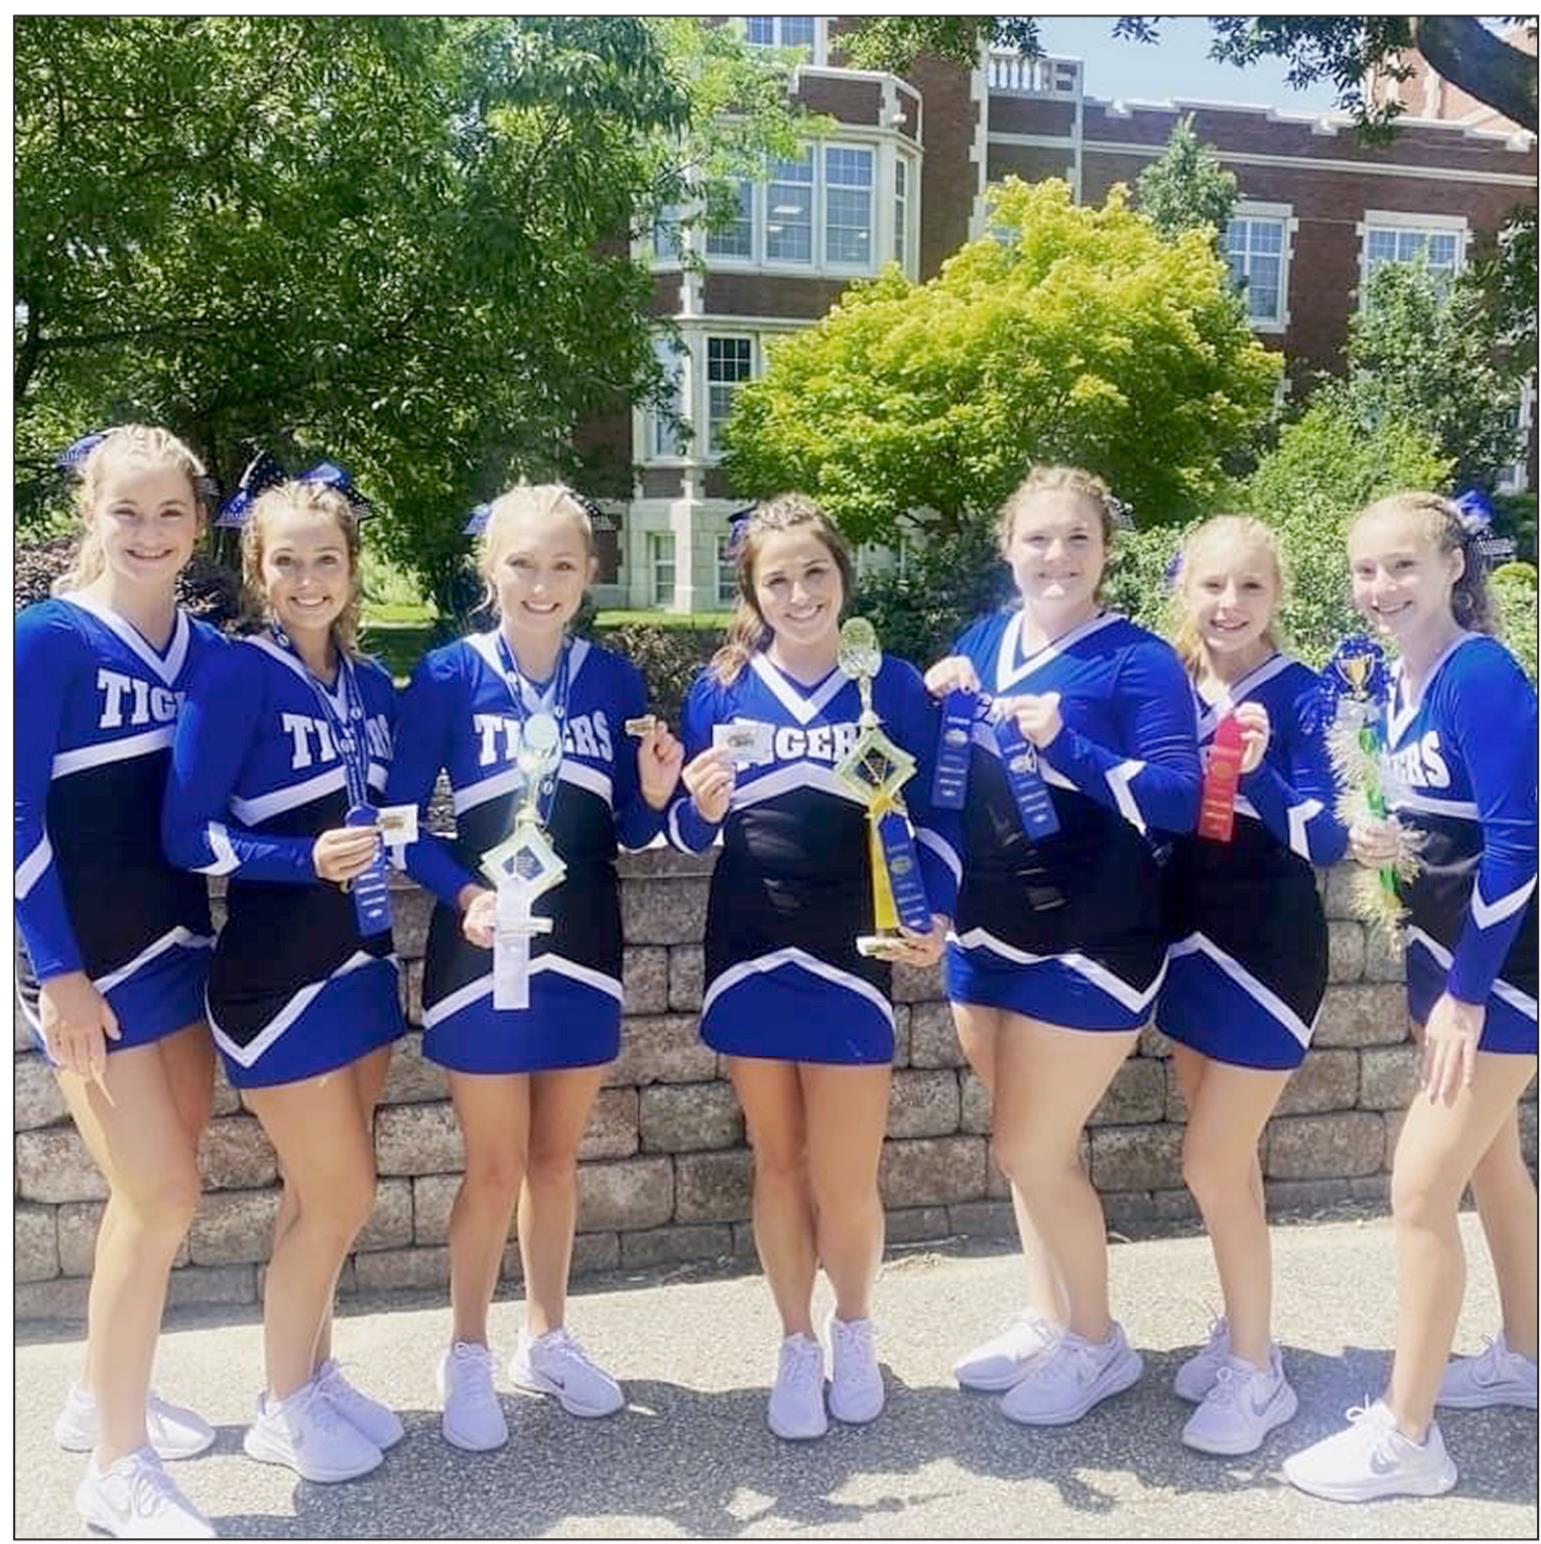 SHS CHEERLEADERS attending the UCA Cheer Camp at Kansas Wesleyan University include, from left: Ava Dix, Claire Plumer, Delanee Bedore, Taigen Kerr, Addie Struckhoff, Saj Snyder and Temperance Northup.